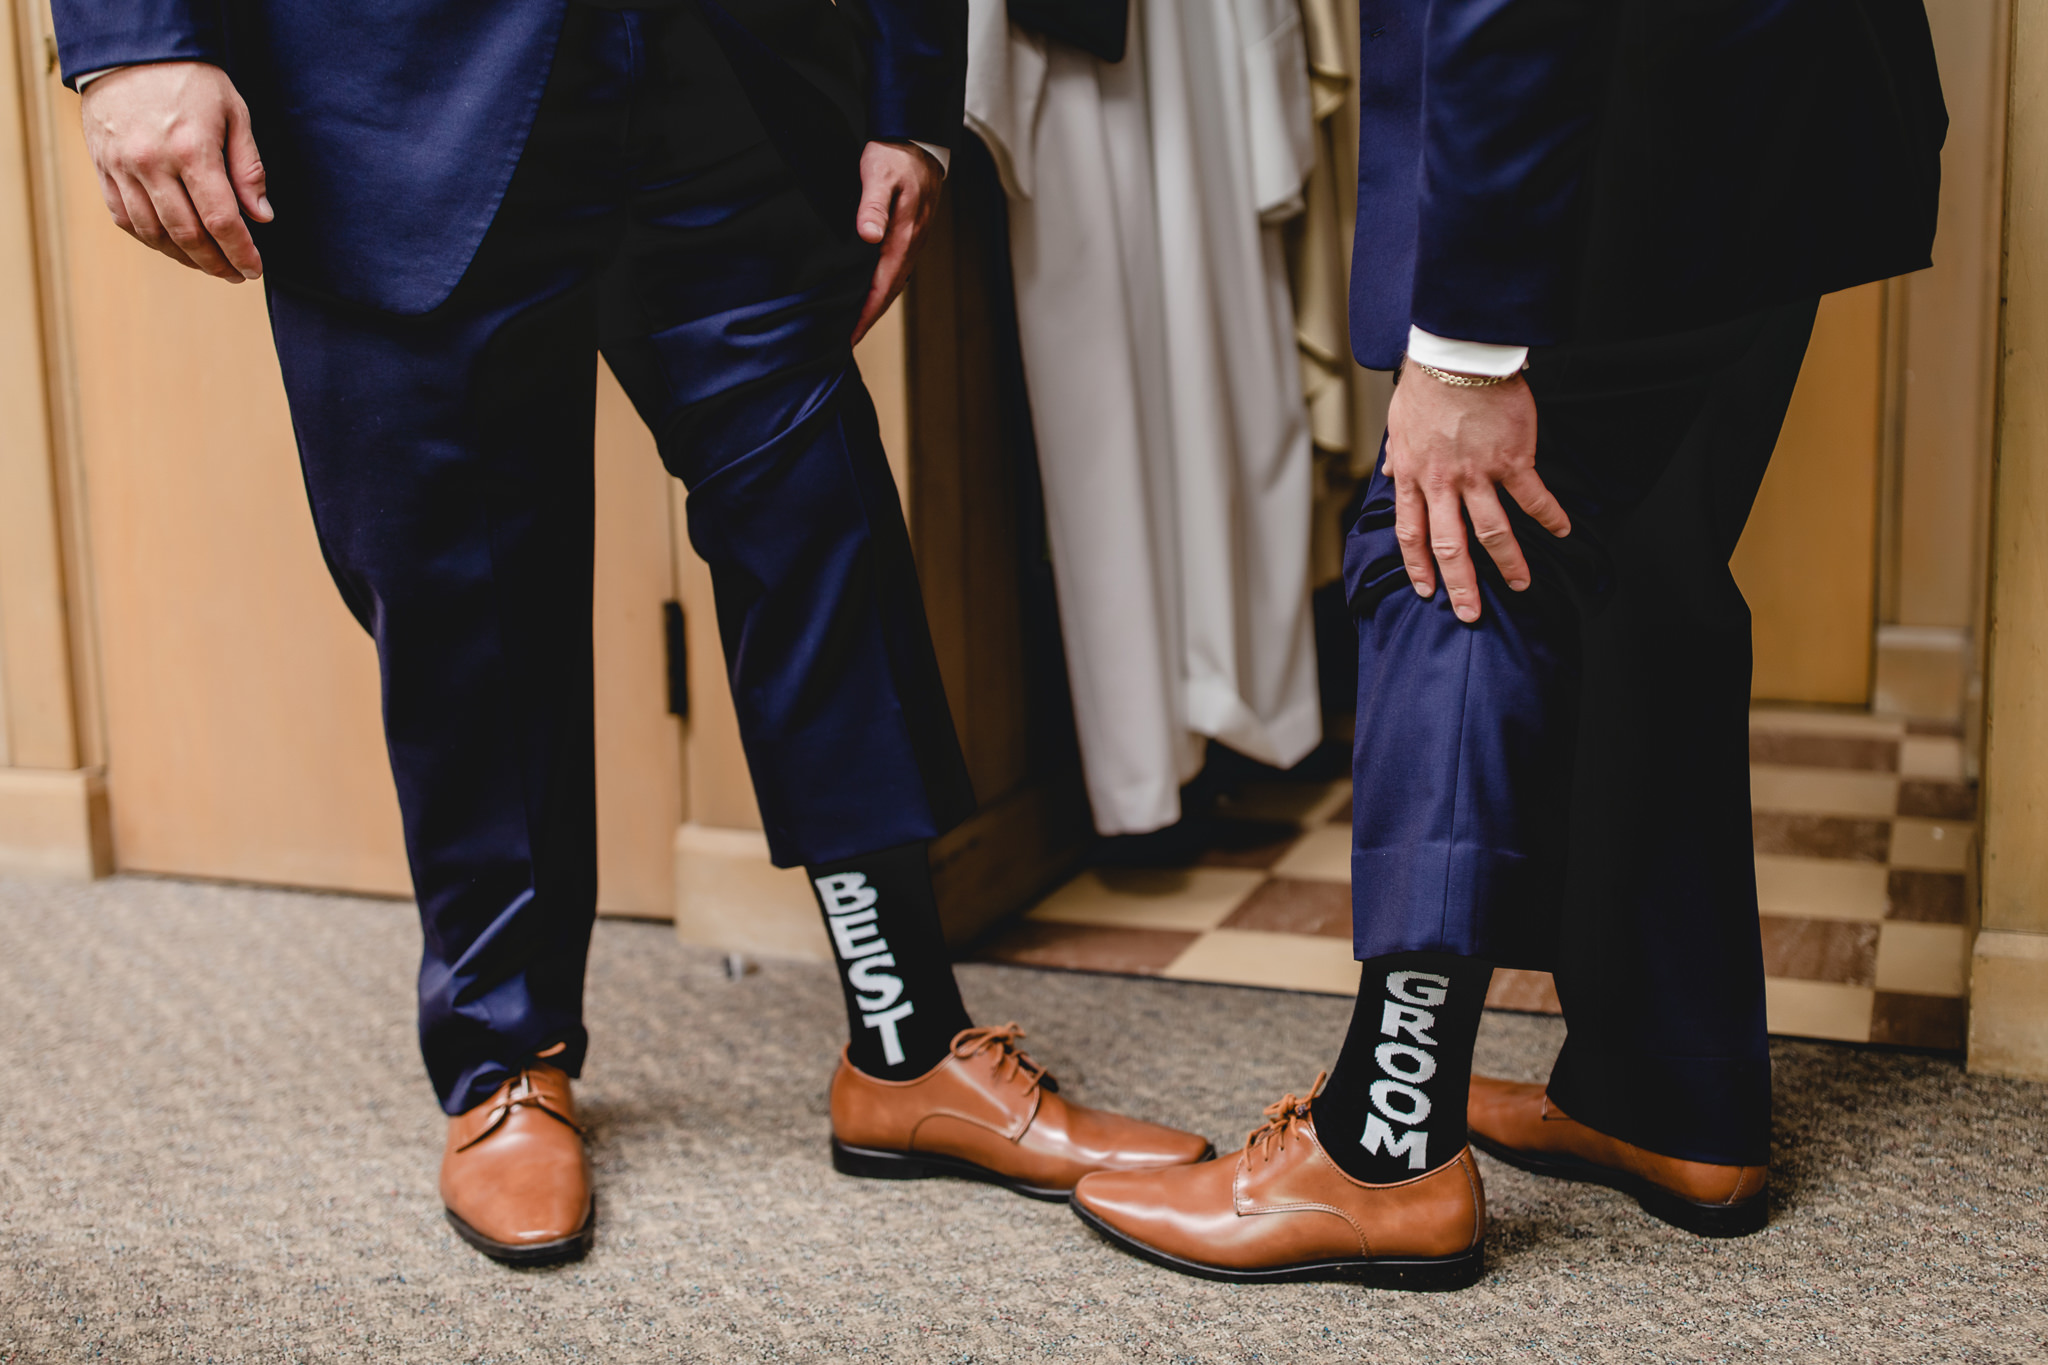 Groom and best man show off their socks at St. Titus Church